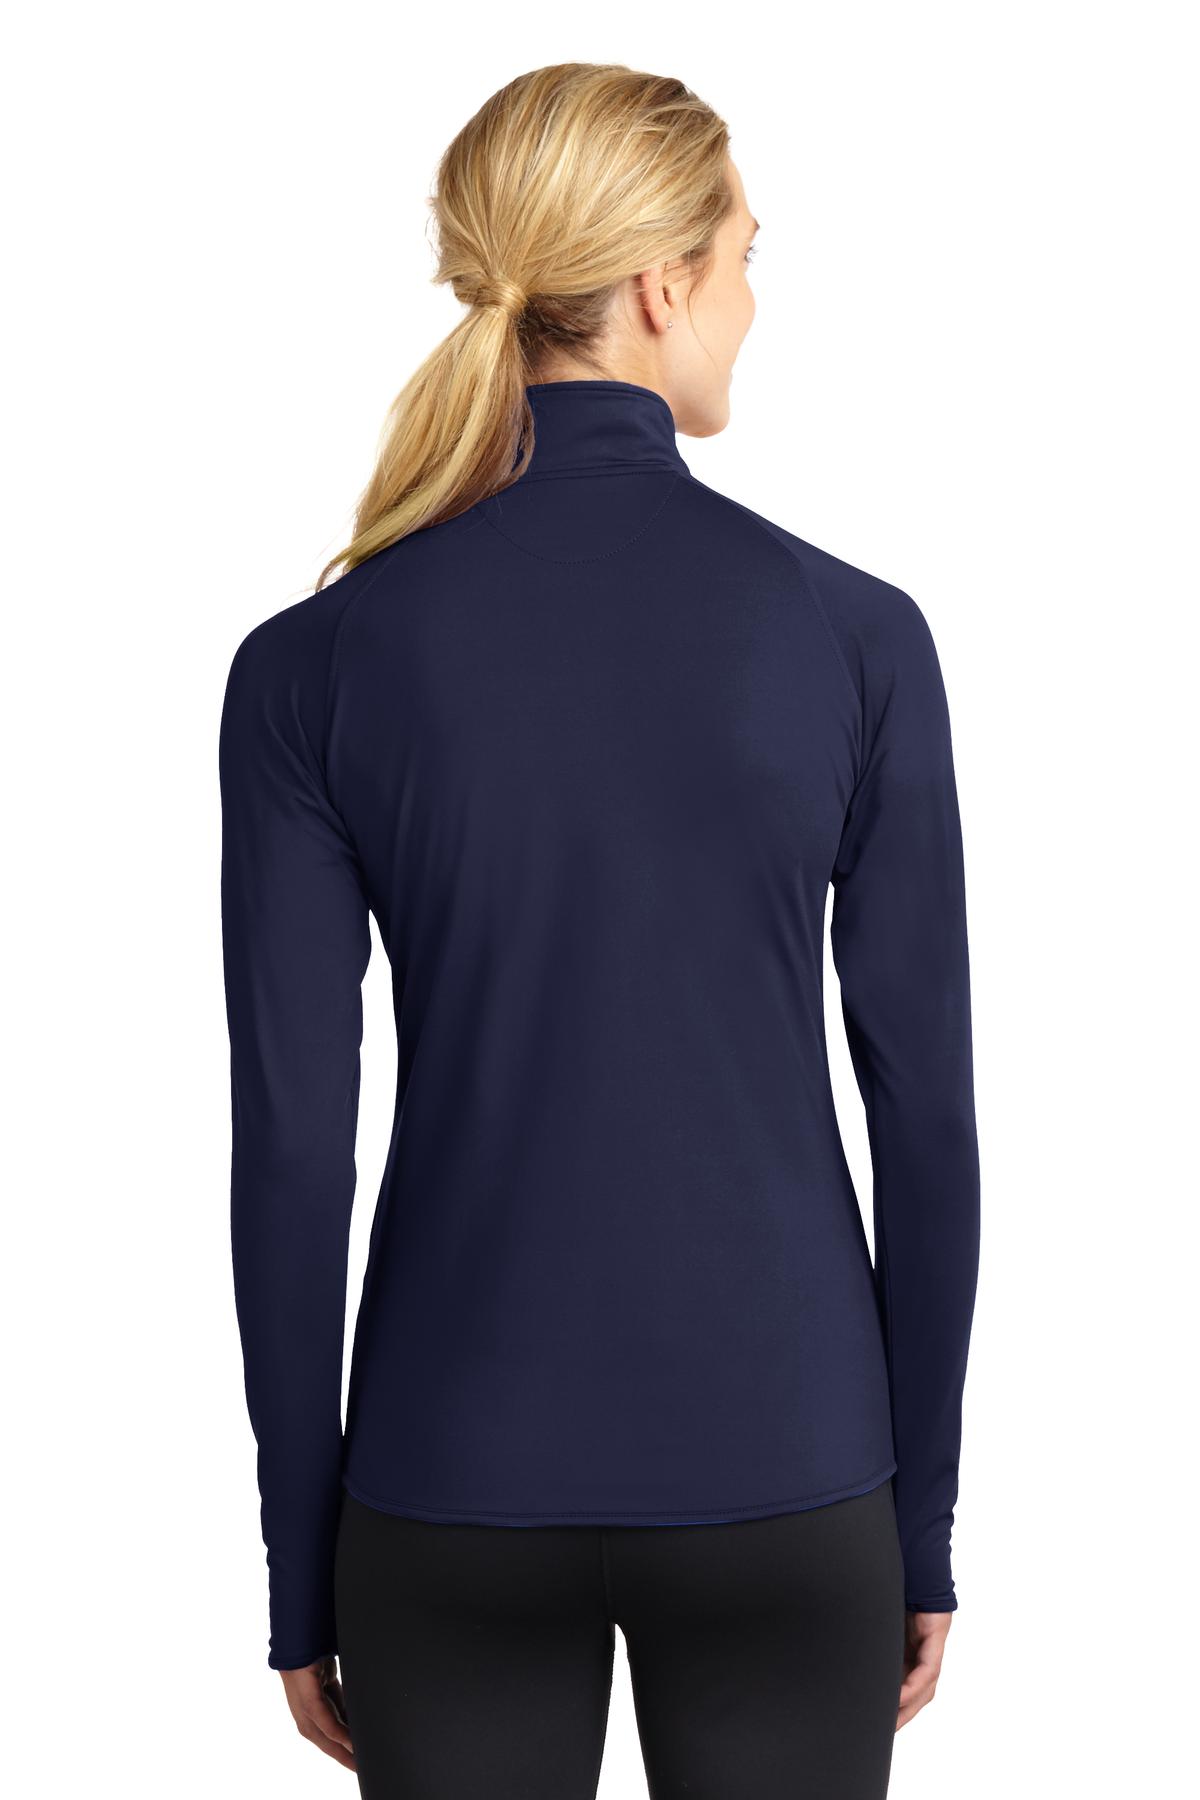 Swaasi Core - Sport-Tek® LADIES Sport-Wick® Stretch 1/2-Zip Pullover Extra Color with EMB Logo